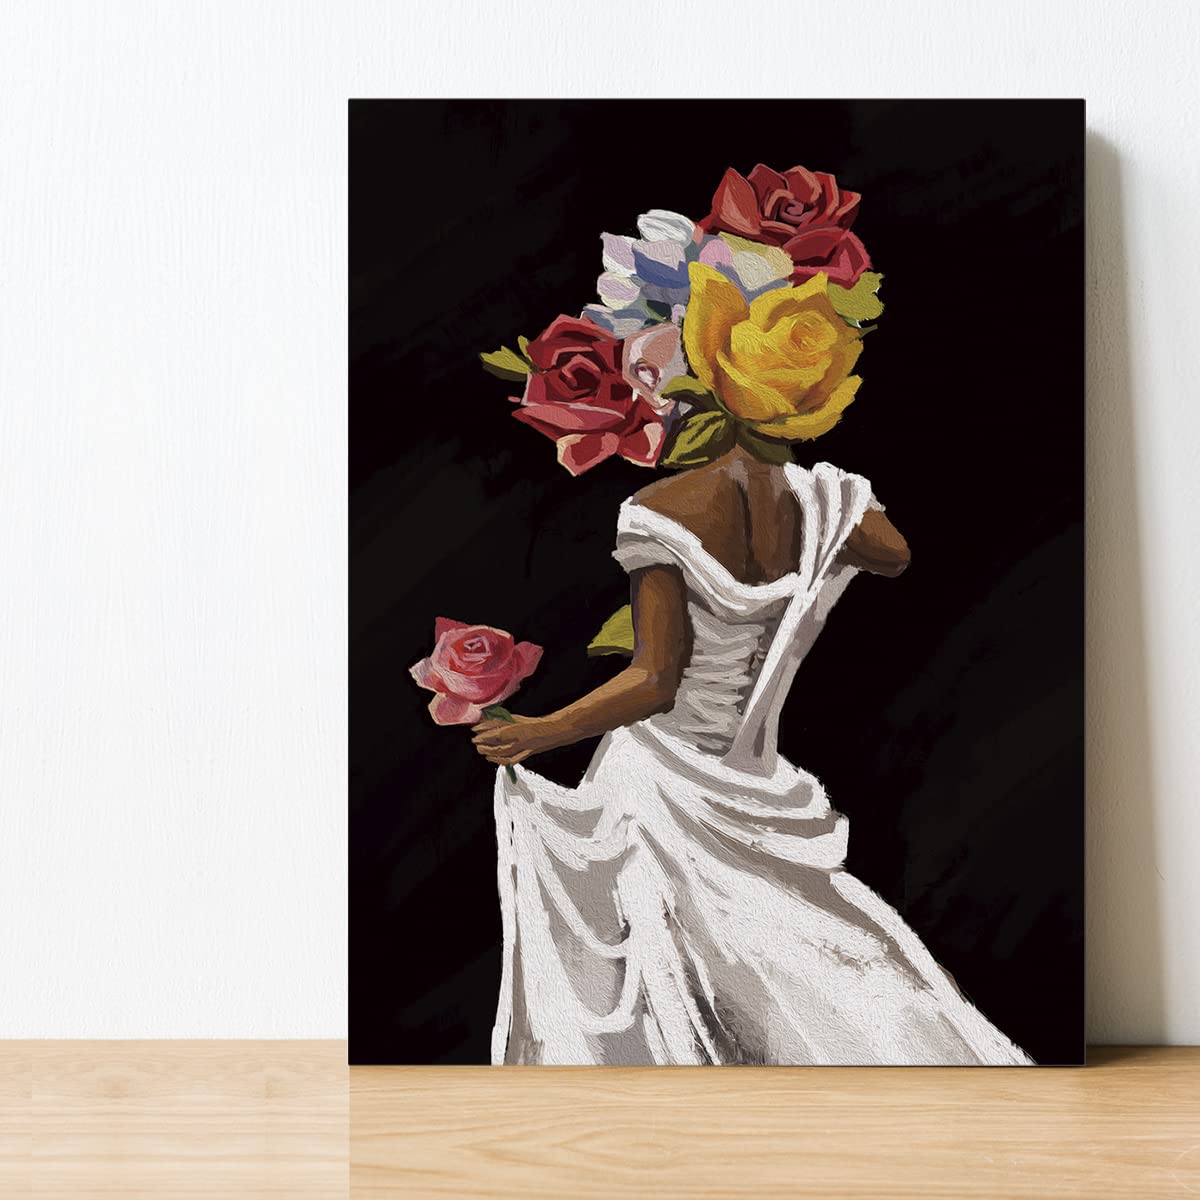 EVXID African American Canvas Poster Painting Wall Art, Floral Black Woman Girl Picture Print Artwork Framed Ready to Hang for Home Bedroom Decor 12 x 15 inch